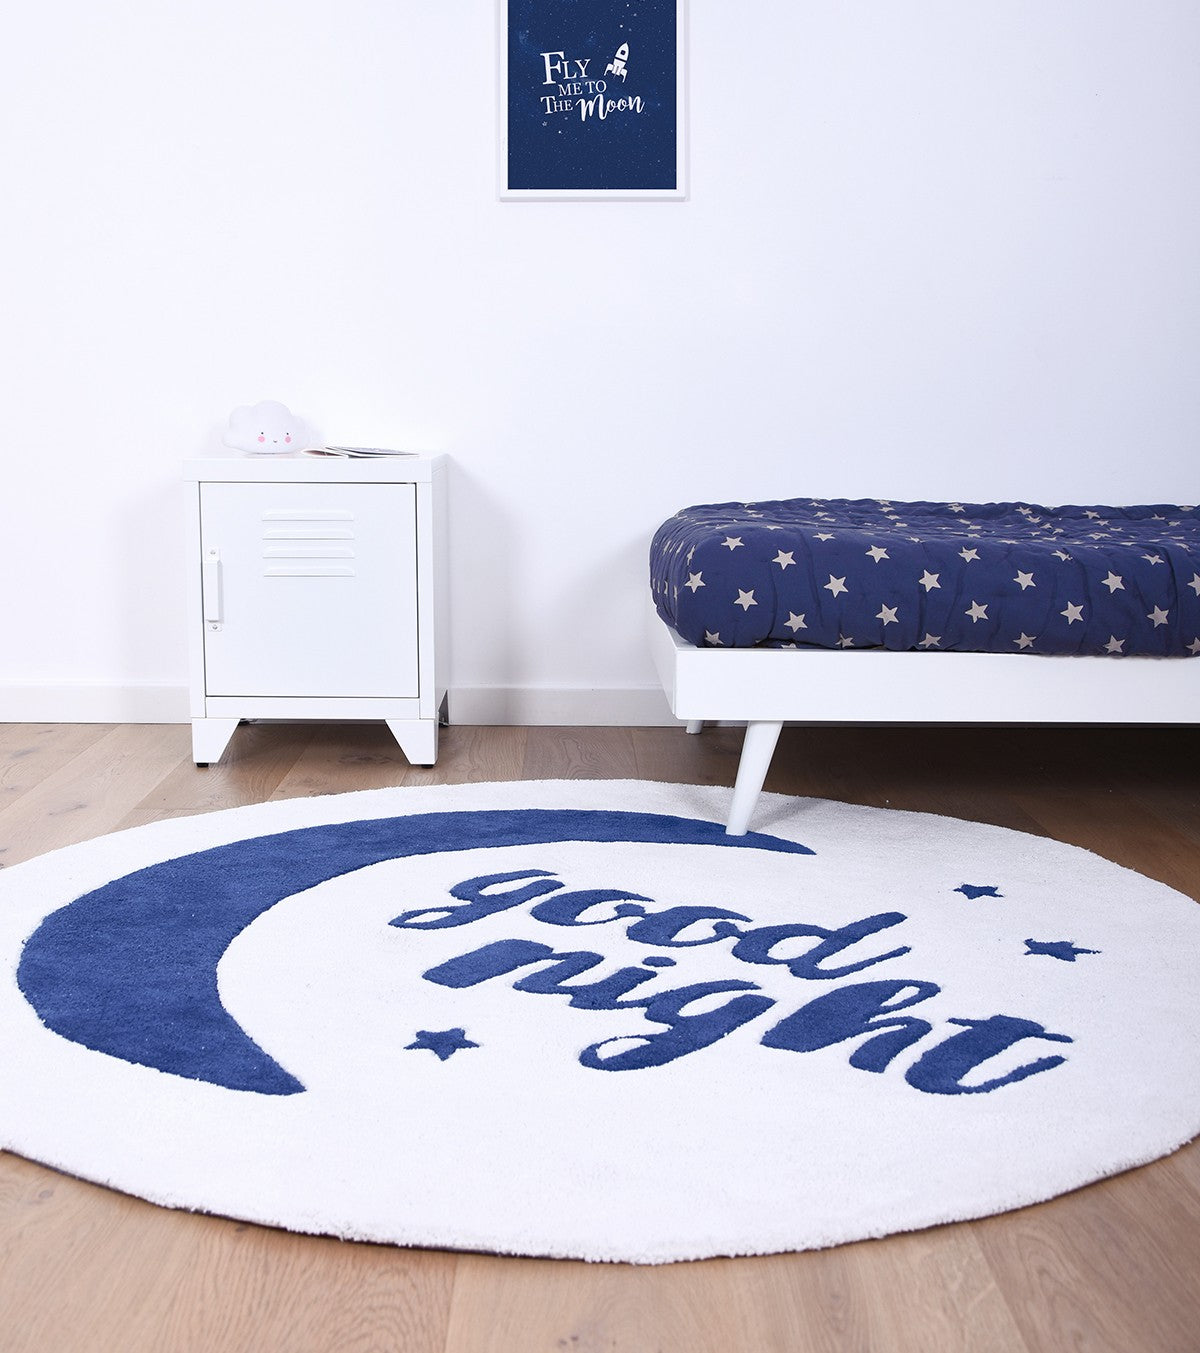 FLY ME TO THE MOON - Tapis - Good night